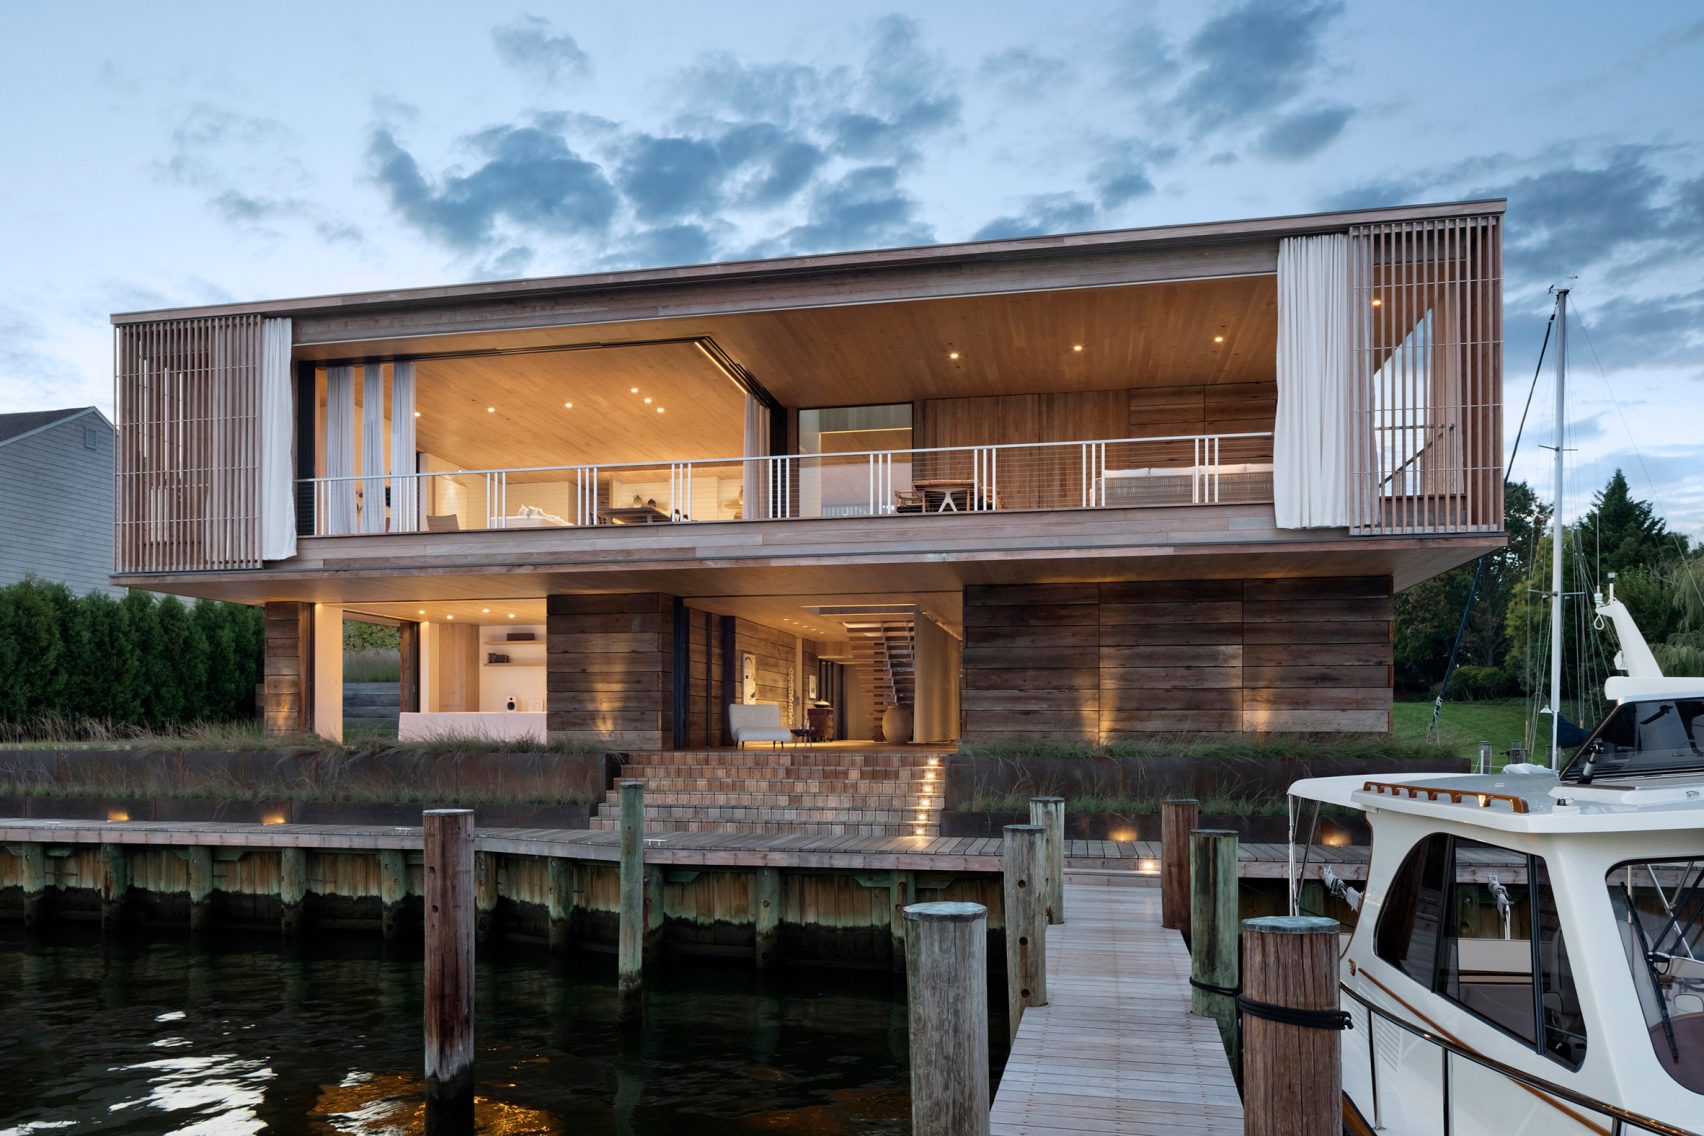 Bates Masi, wooden home, sailing family, Annapolis, waterfront, New York, Chesapeake Bay, Acton Cove, Maryland, capital city, Us Naval Academy, dock, boat, residence, boating, sliding glass door, curtain, indoor, outdoor, privacy, weather, living room, cantilevered decks, balcony, Acton Cove, modern, nautical aesthetic, white walls, cabinet, furniture, kitchen, couch, six PP503 chair, Hans J Wegner, swimming pool, dock, pool, bedroom, en-suite bathroom, Acton House, garage, studio, garden, Virginia-based Gregg Bleam